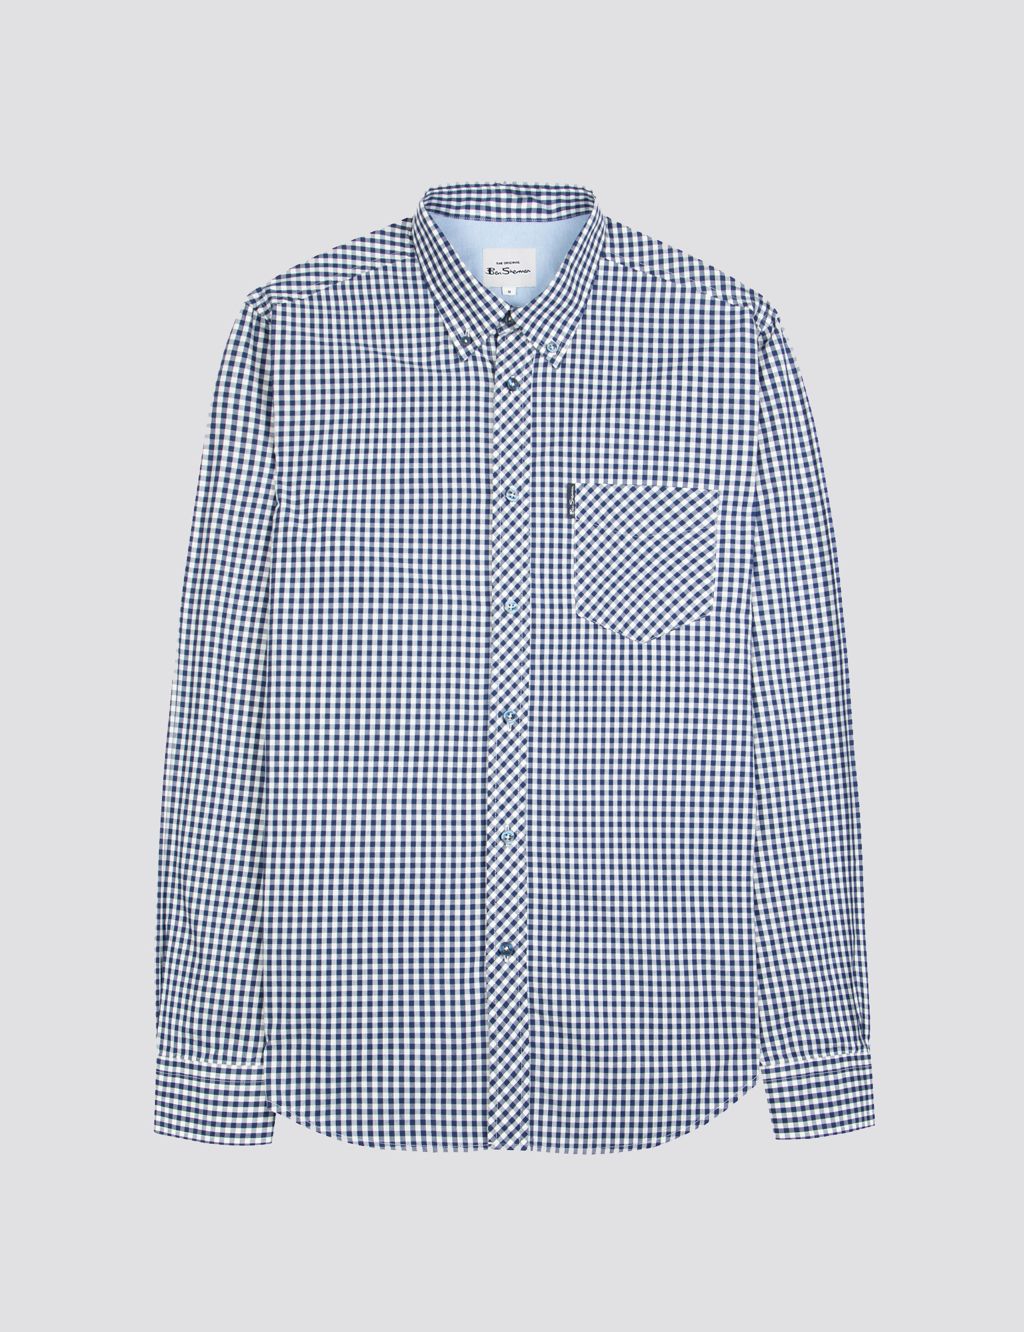 Regular Fit Pure Cotton Gingham Oxford Shirt image 2